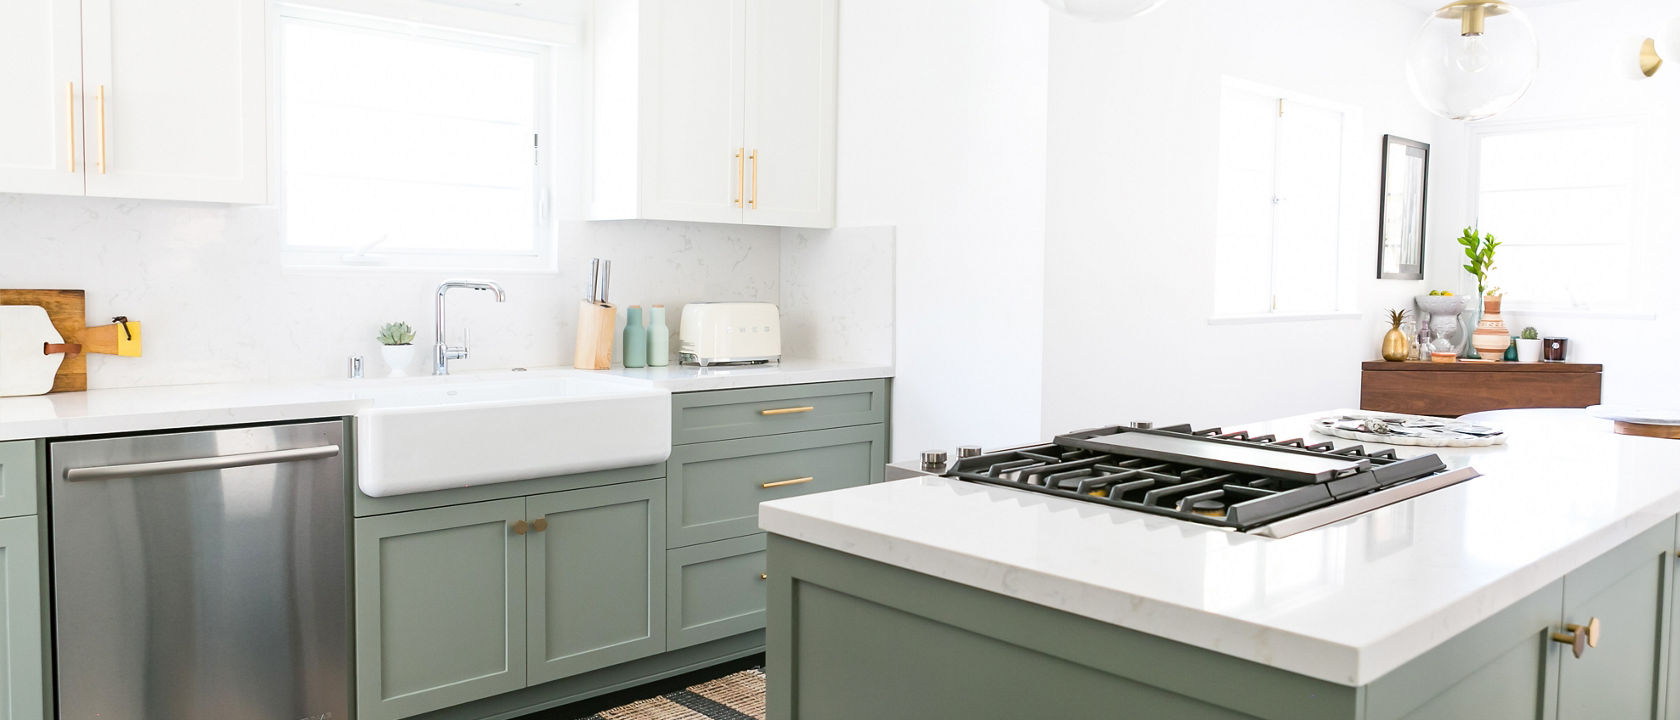 Torquay countertops in an olive kitchen theme with a farmhouse style sink